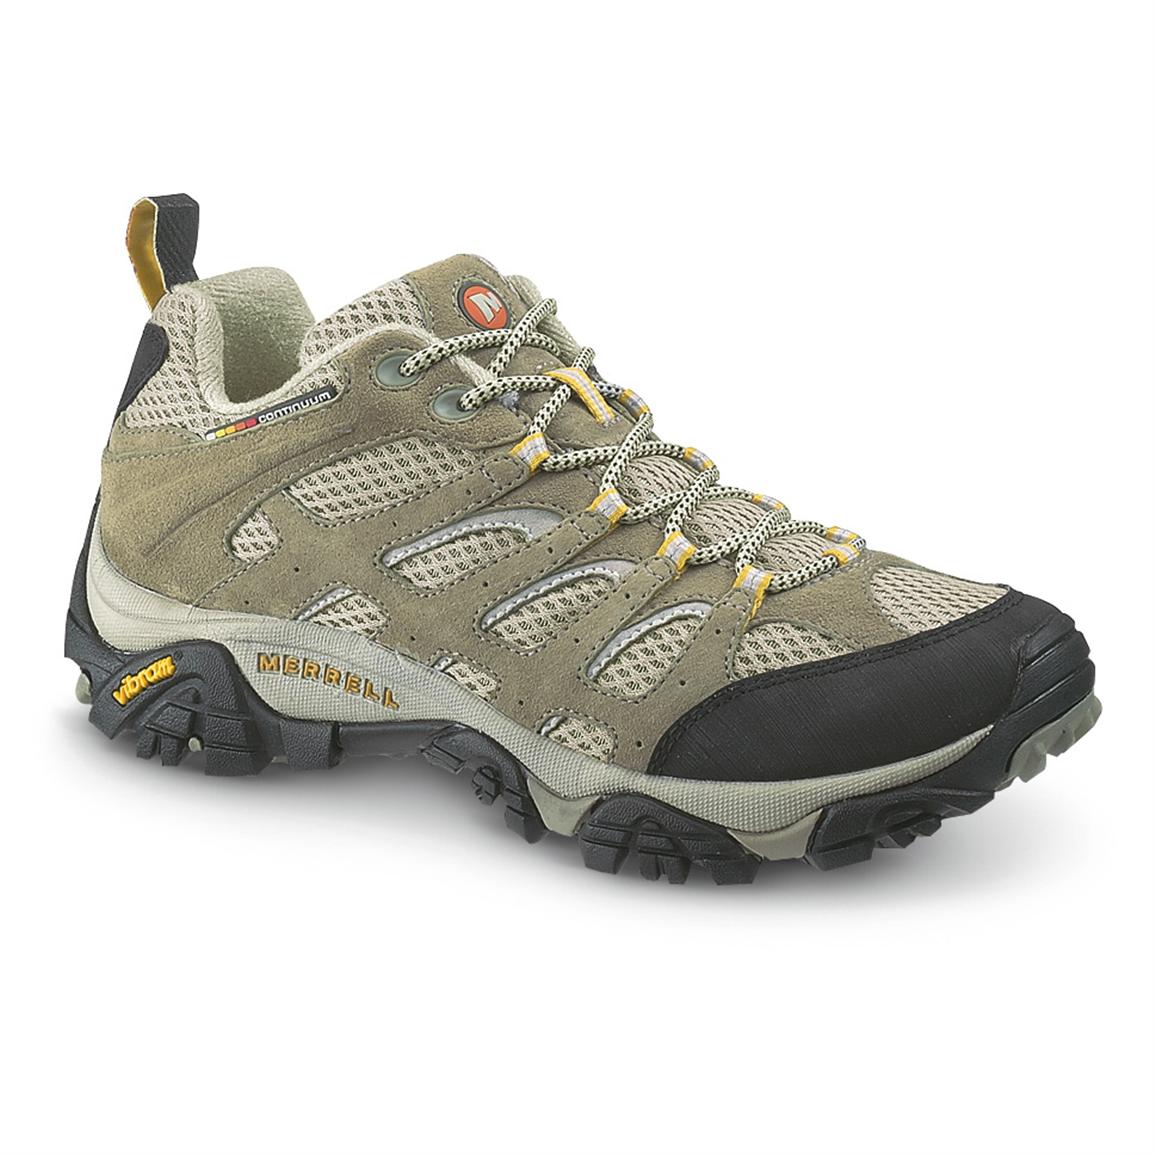 77 White Columbia or merrell hiking shoes for Women